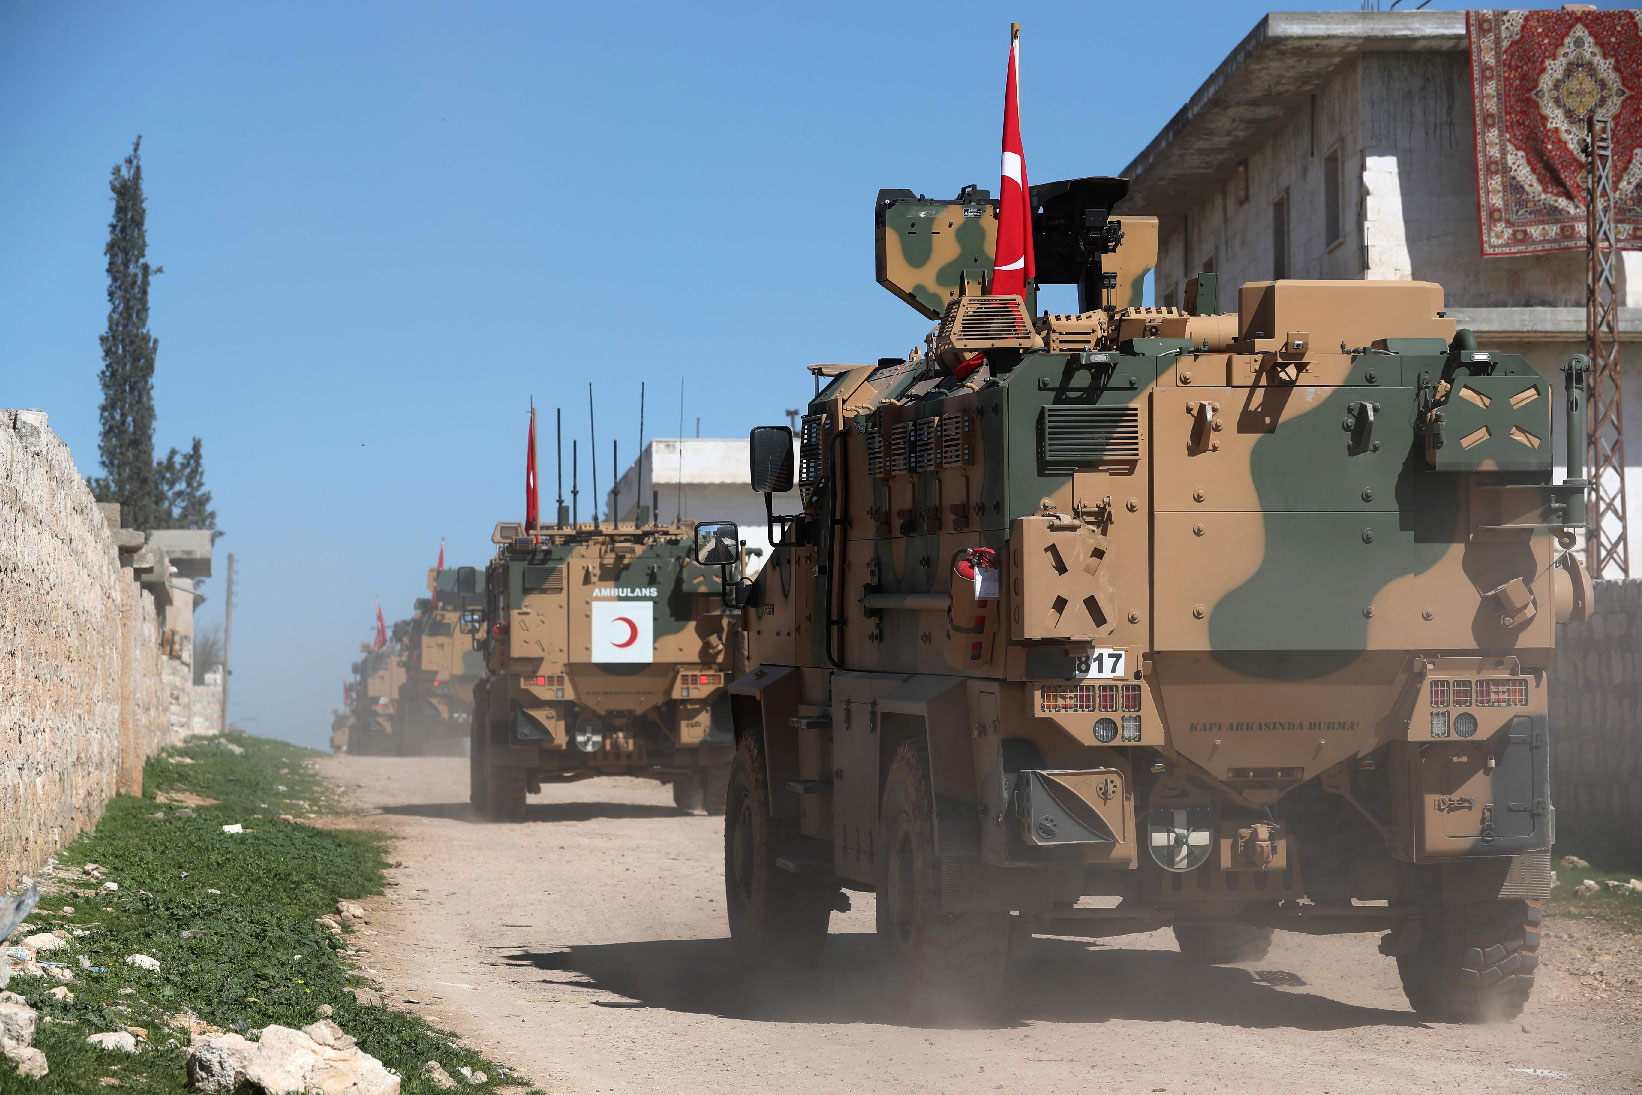 A column of armoured Turkish military vehicles drives on a patrol along a road in the de-militarised zone in the western countryside of Syria's Aleppo province near the town of Al-Eis on March 8, 2019.